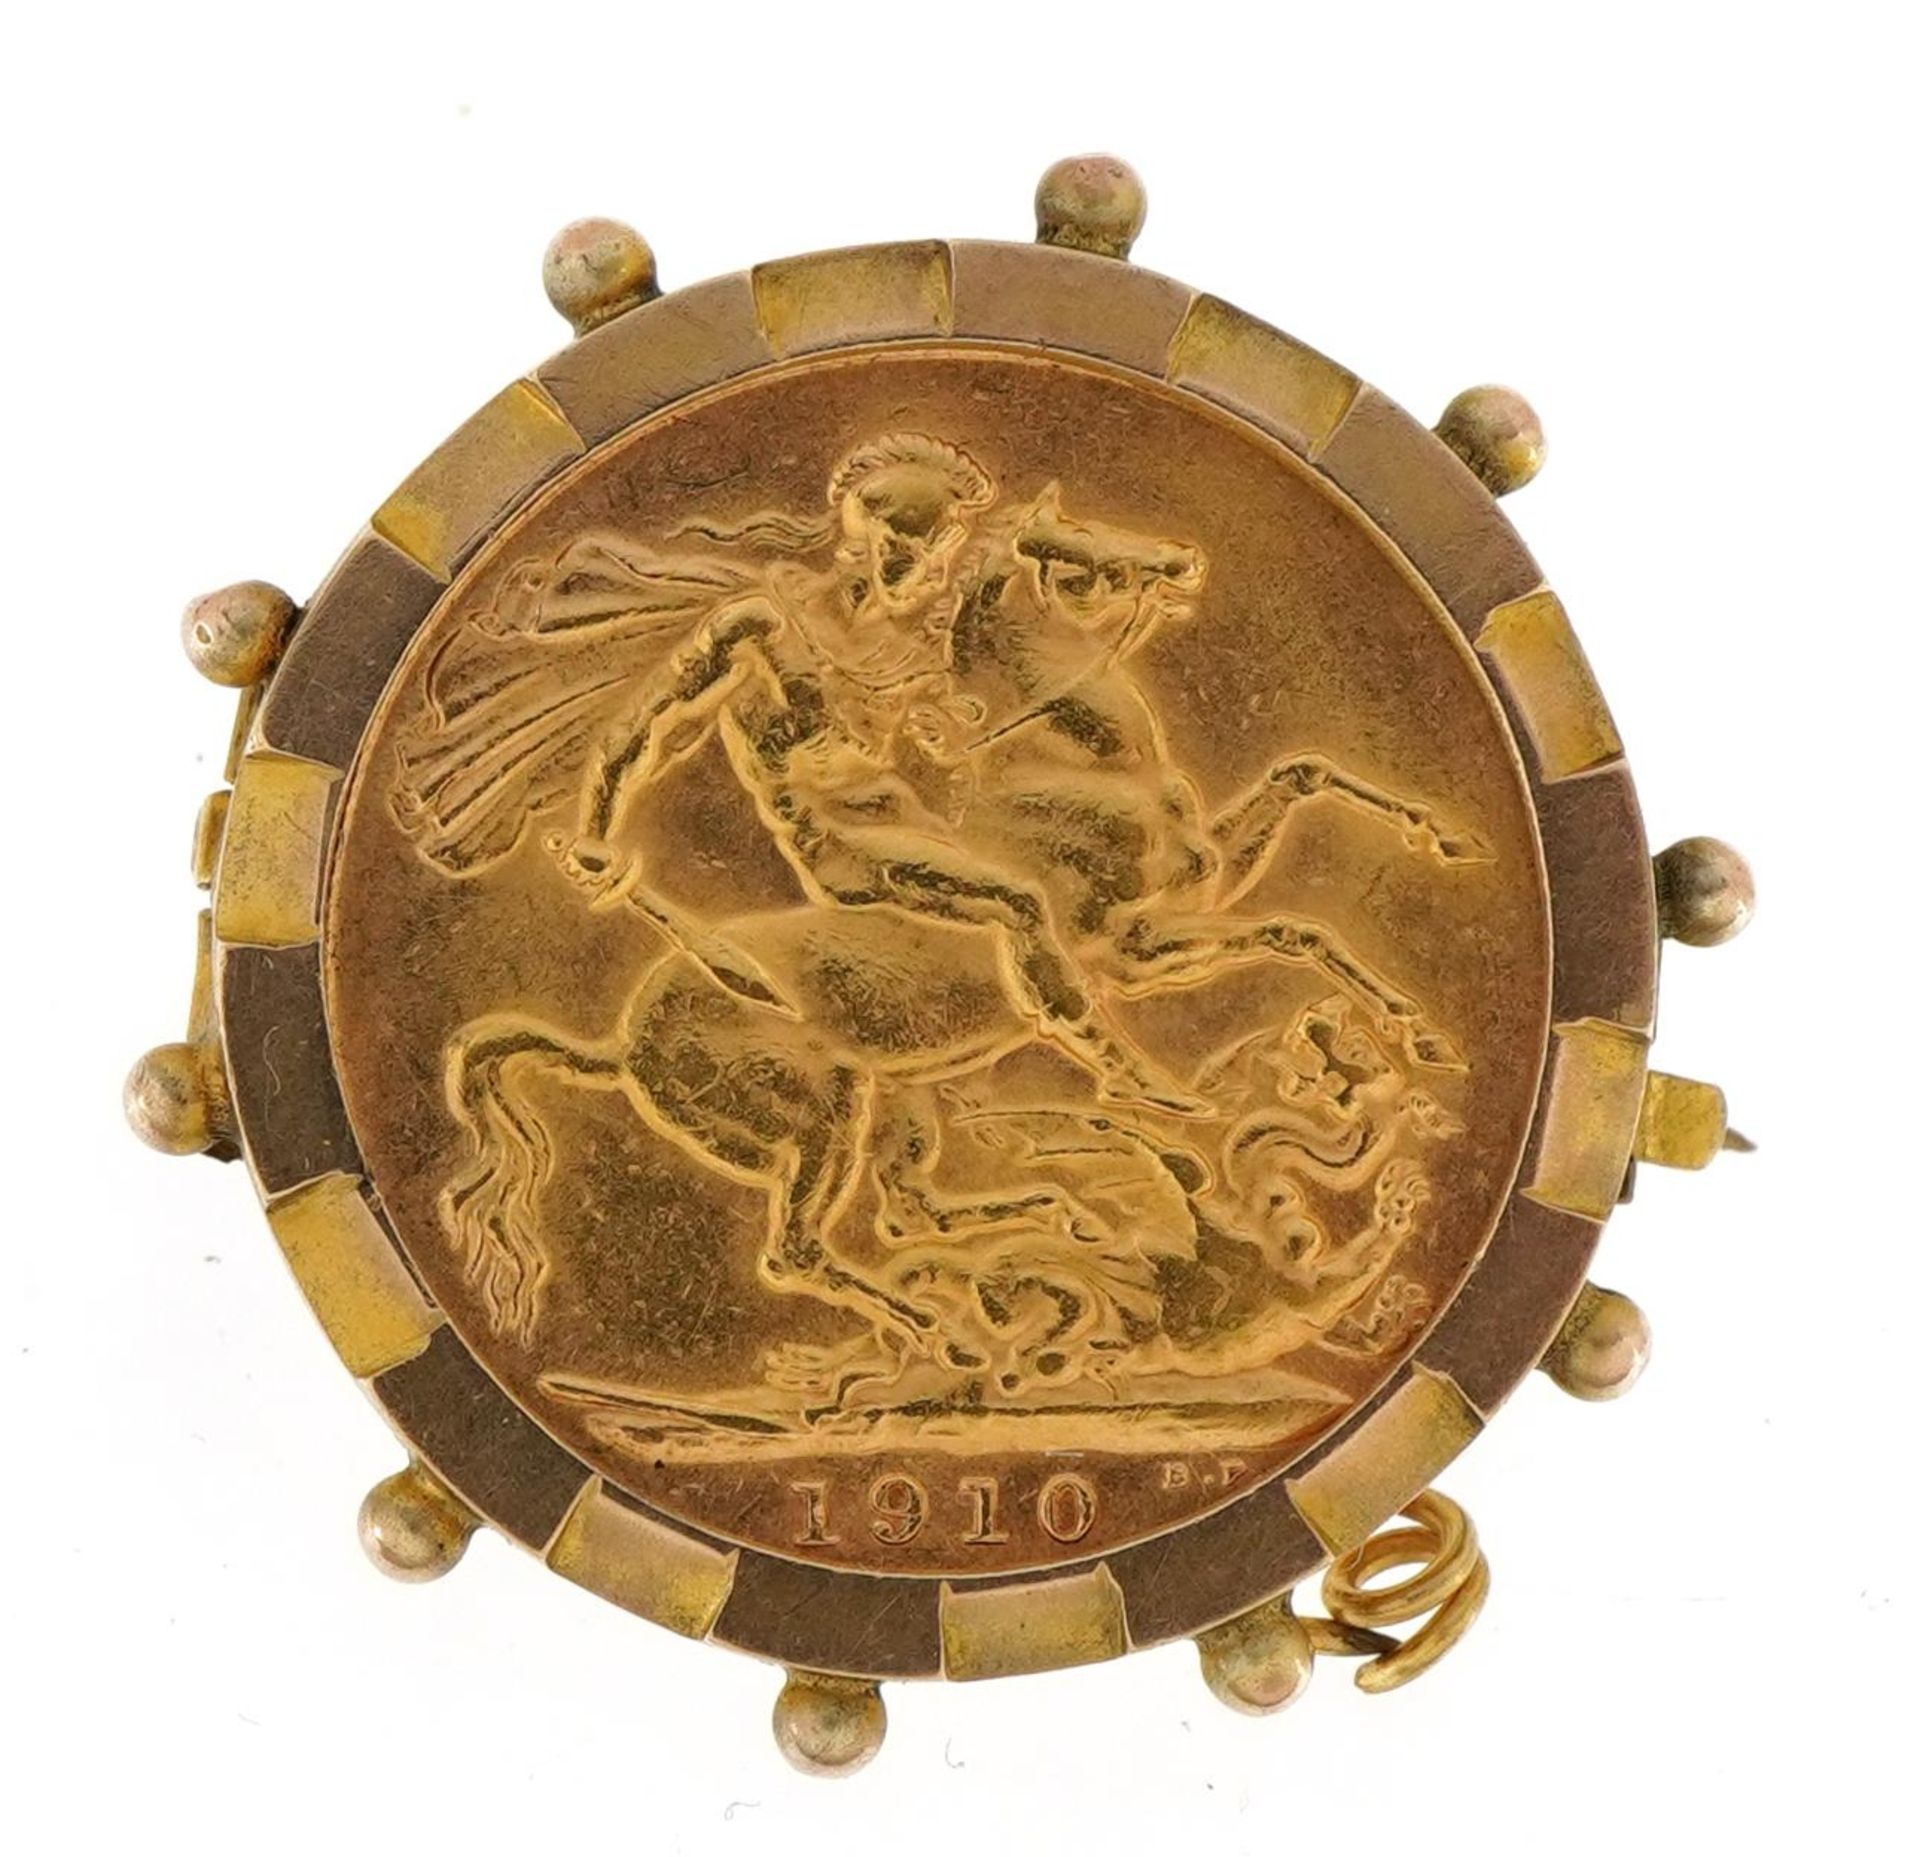 Edward VII 1910 gold sovereign housed in a 9ct gold brooch mount with safety chain, 2.7cm in